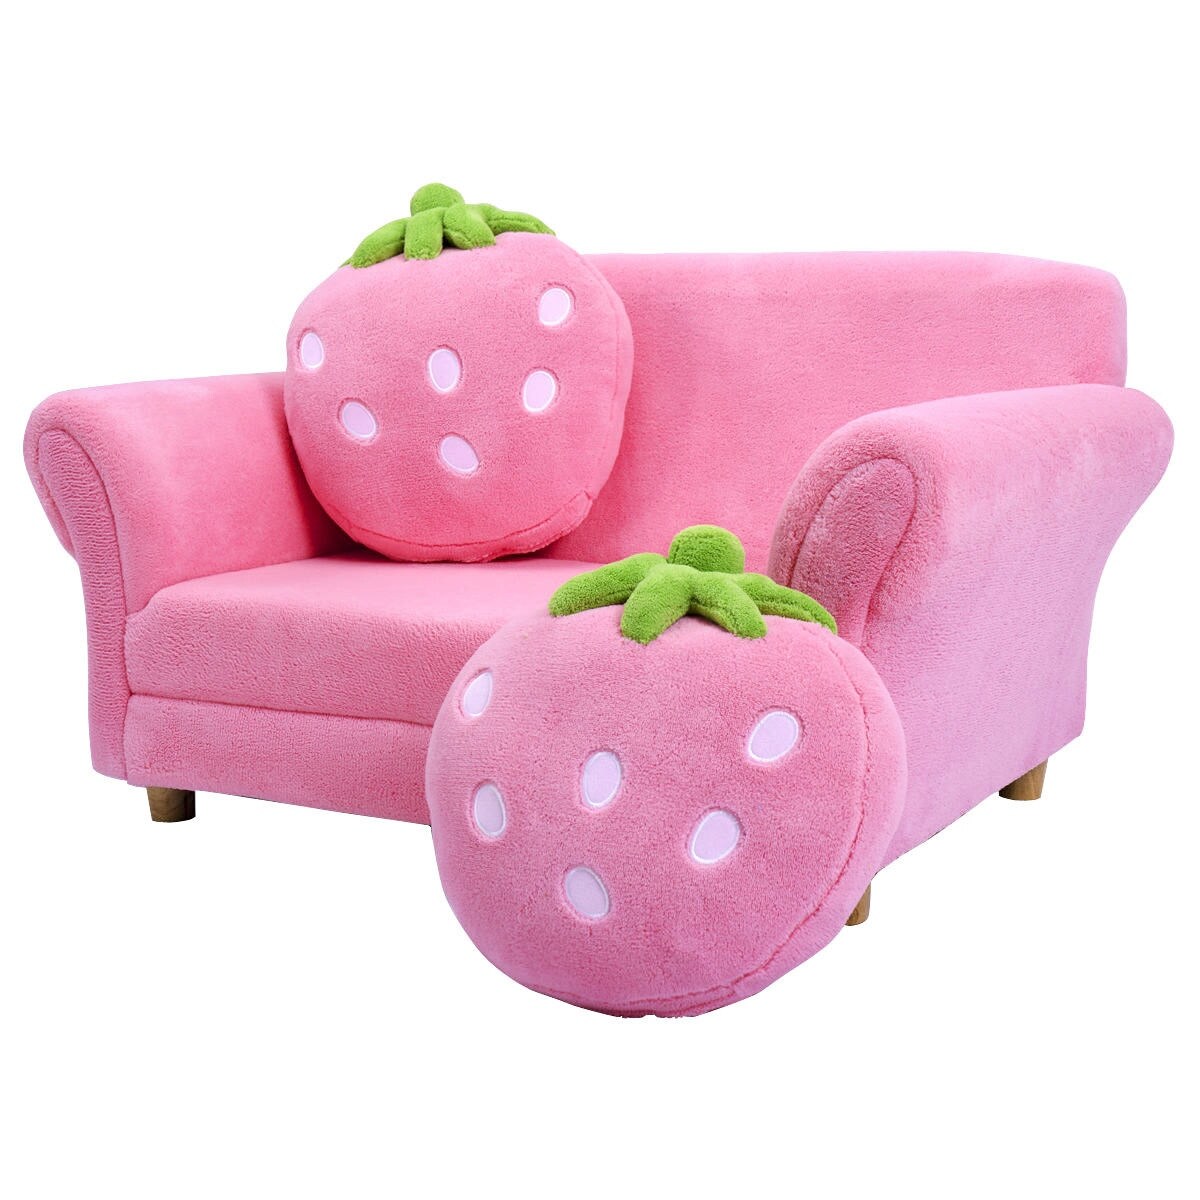 Baby Kids Cute Single Sofa Armrest Chair Couch w/2 Strawberry Pillow Lounge Gift 